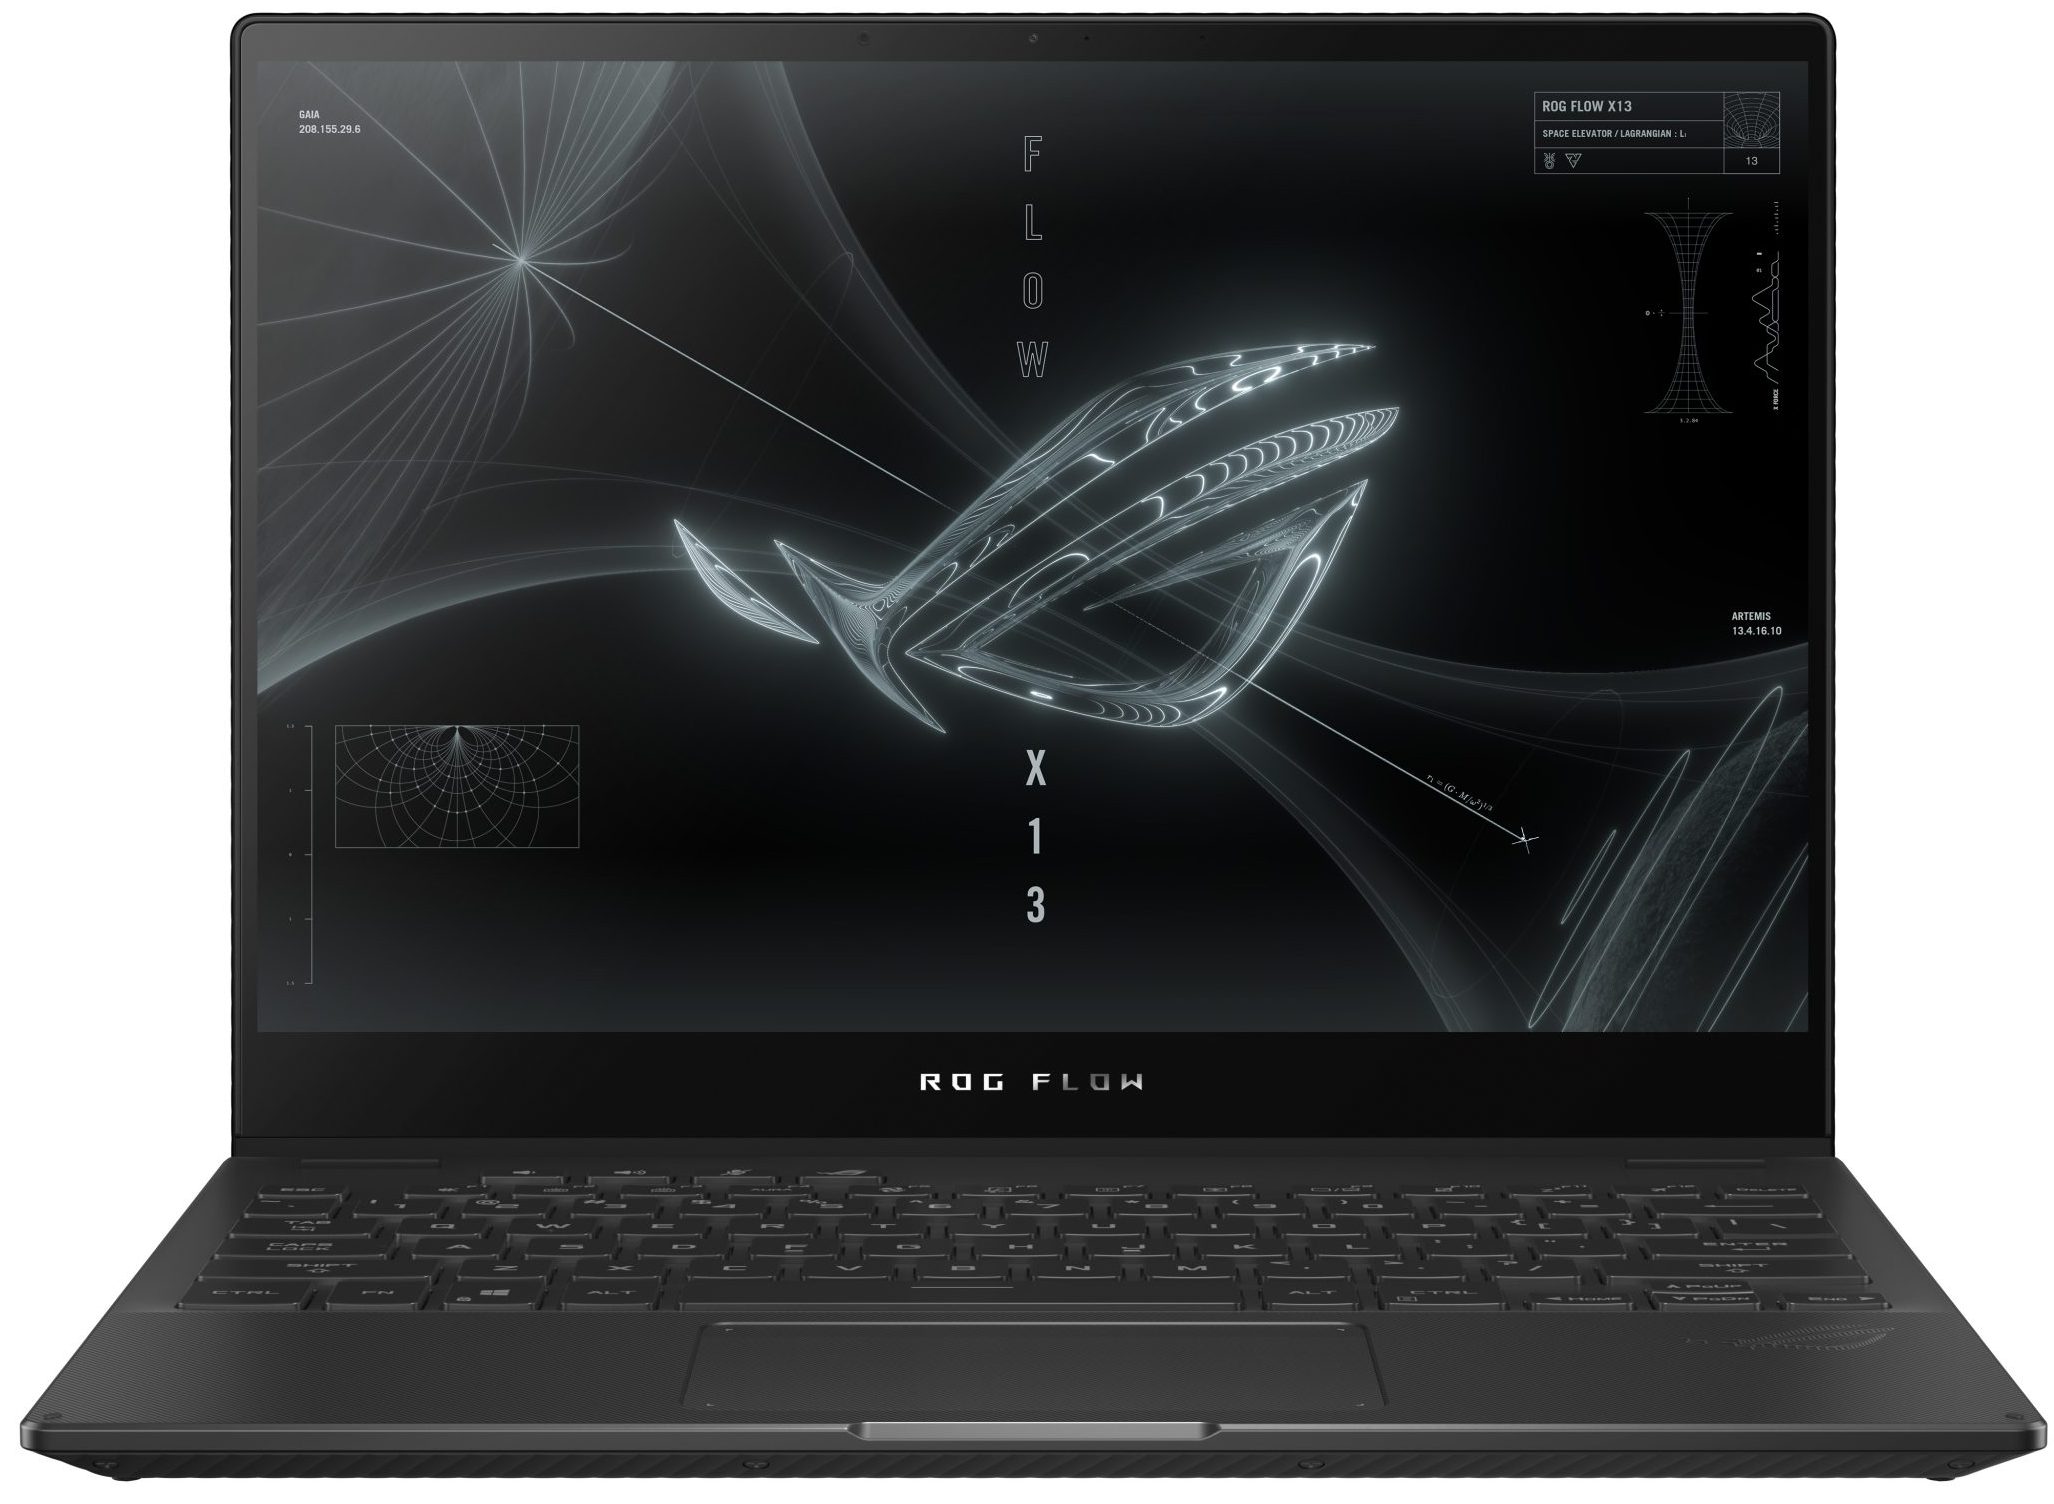 ASUS ROG Flow X13 (GV301 / PV301) - Specs, Tests, and Prices 